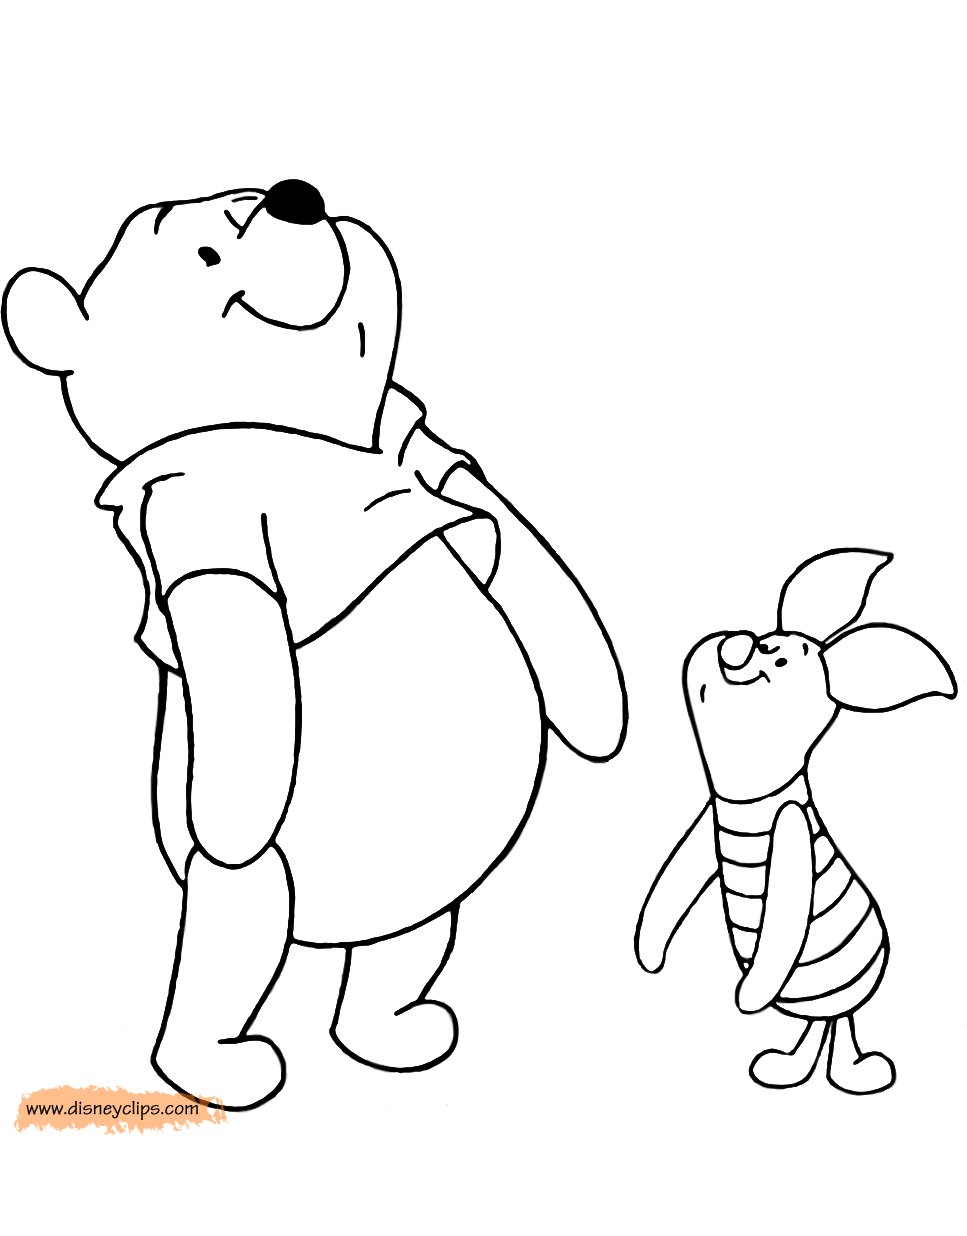 Winnie the Pooh & Friends Coloring Pages | Disney Coloring Book